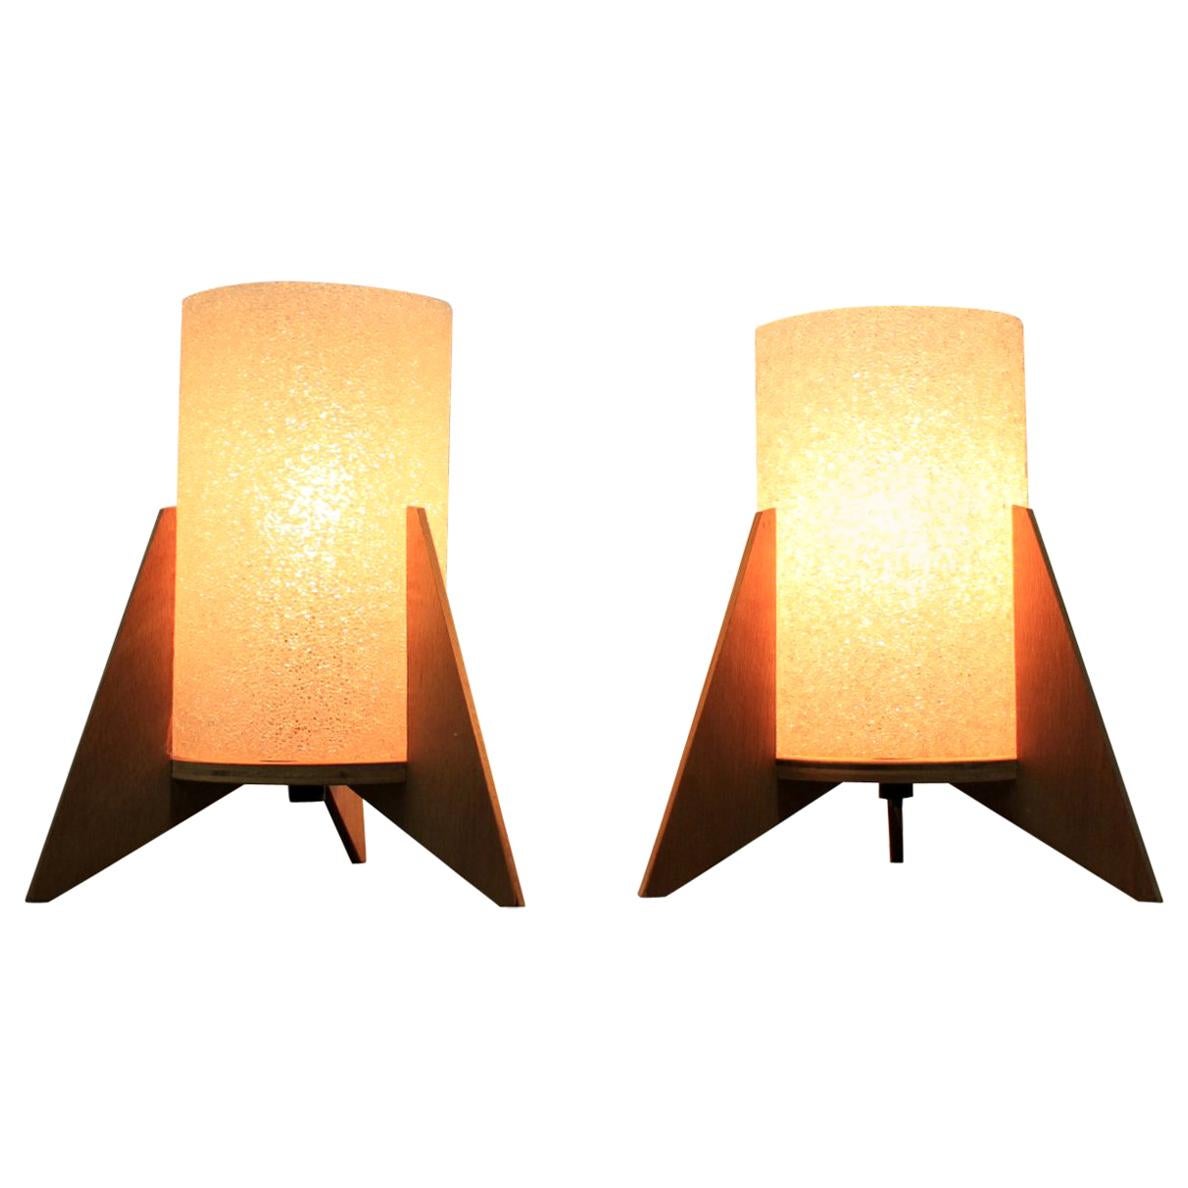 Pair of Midcentury Table Lamps, Rockets, Pokrok Zilina, 1970s For Sale